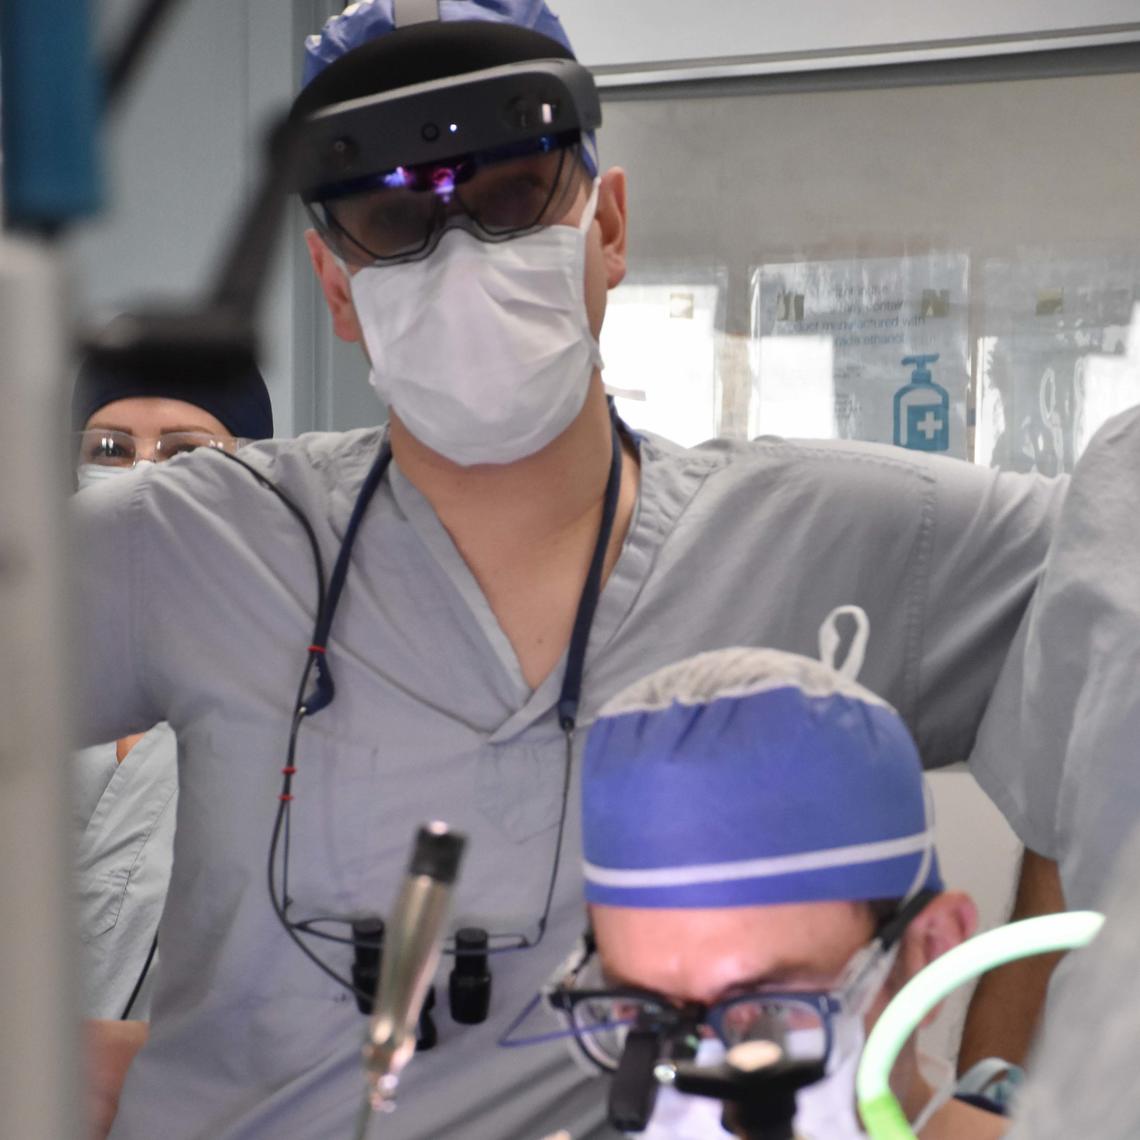 Dr. William Kent performed the mitral valve surgery, while Dr. Corey Adams used the Hololens to transmit images. 